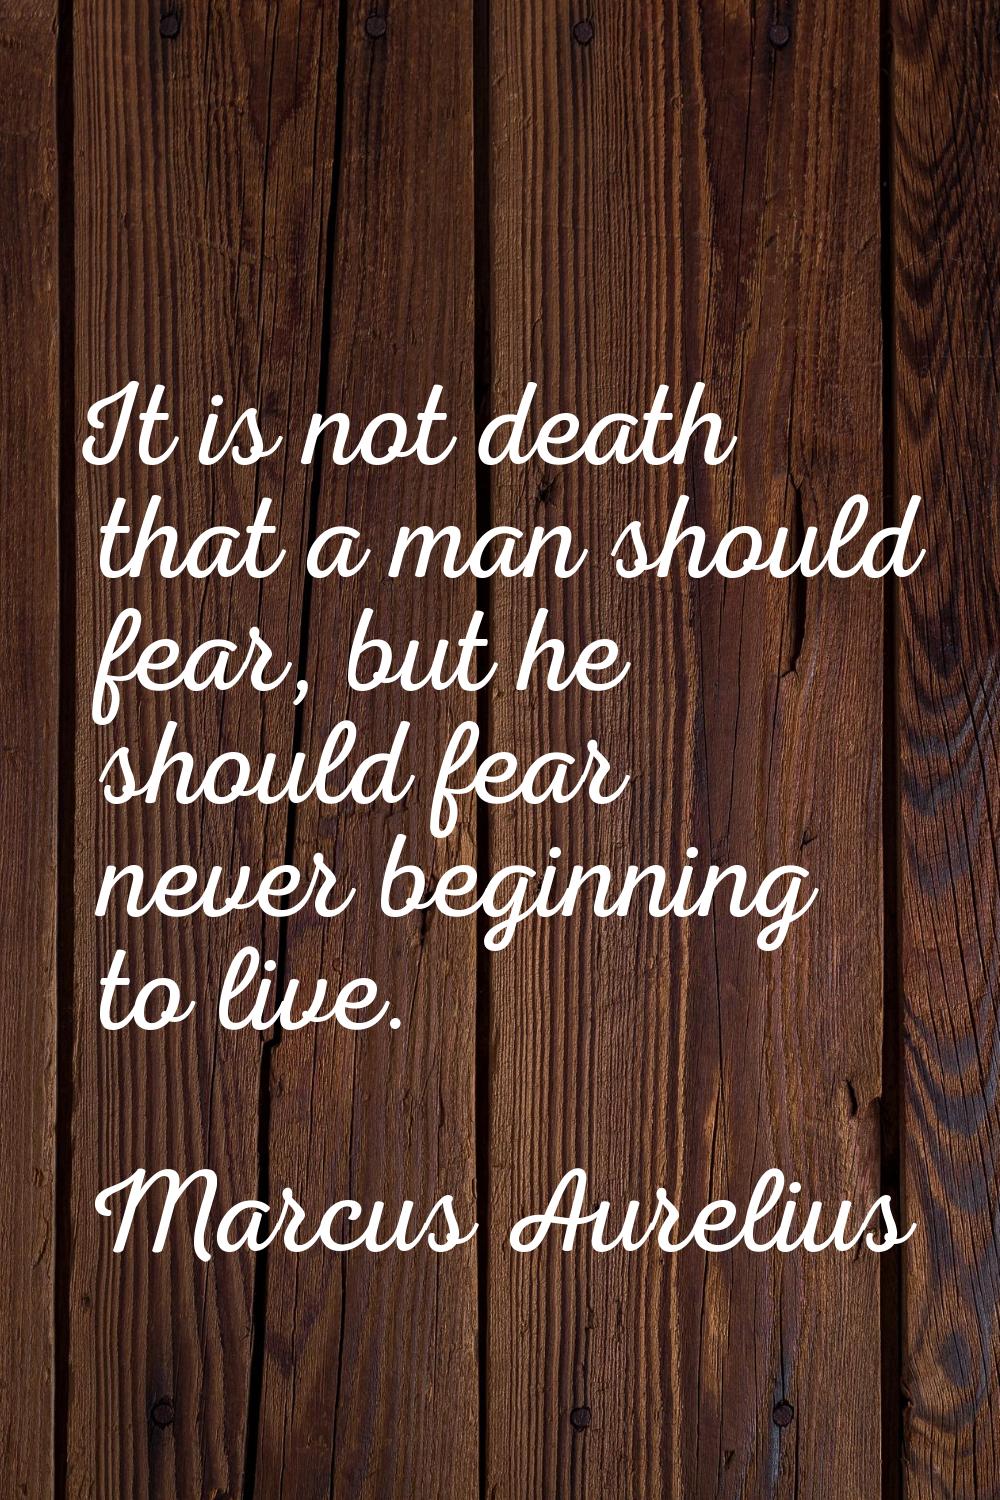 It is not death that a man should fear, but he should fear never beginning to live.